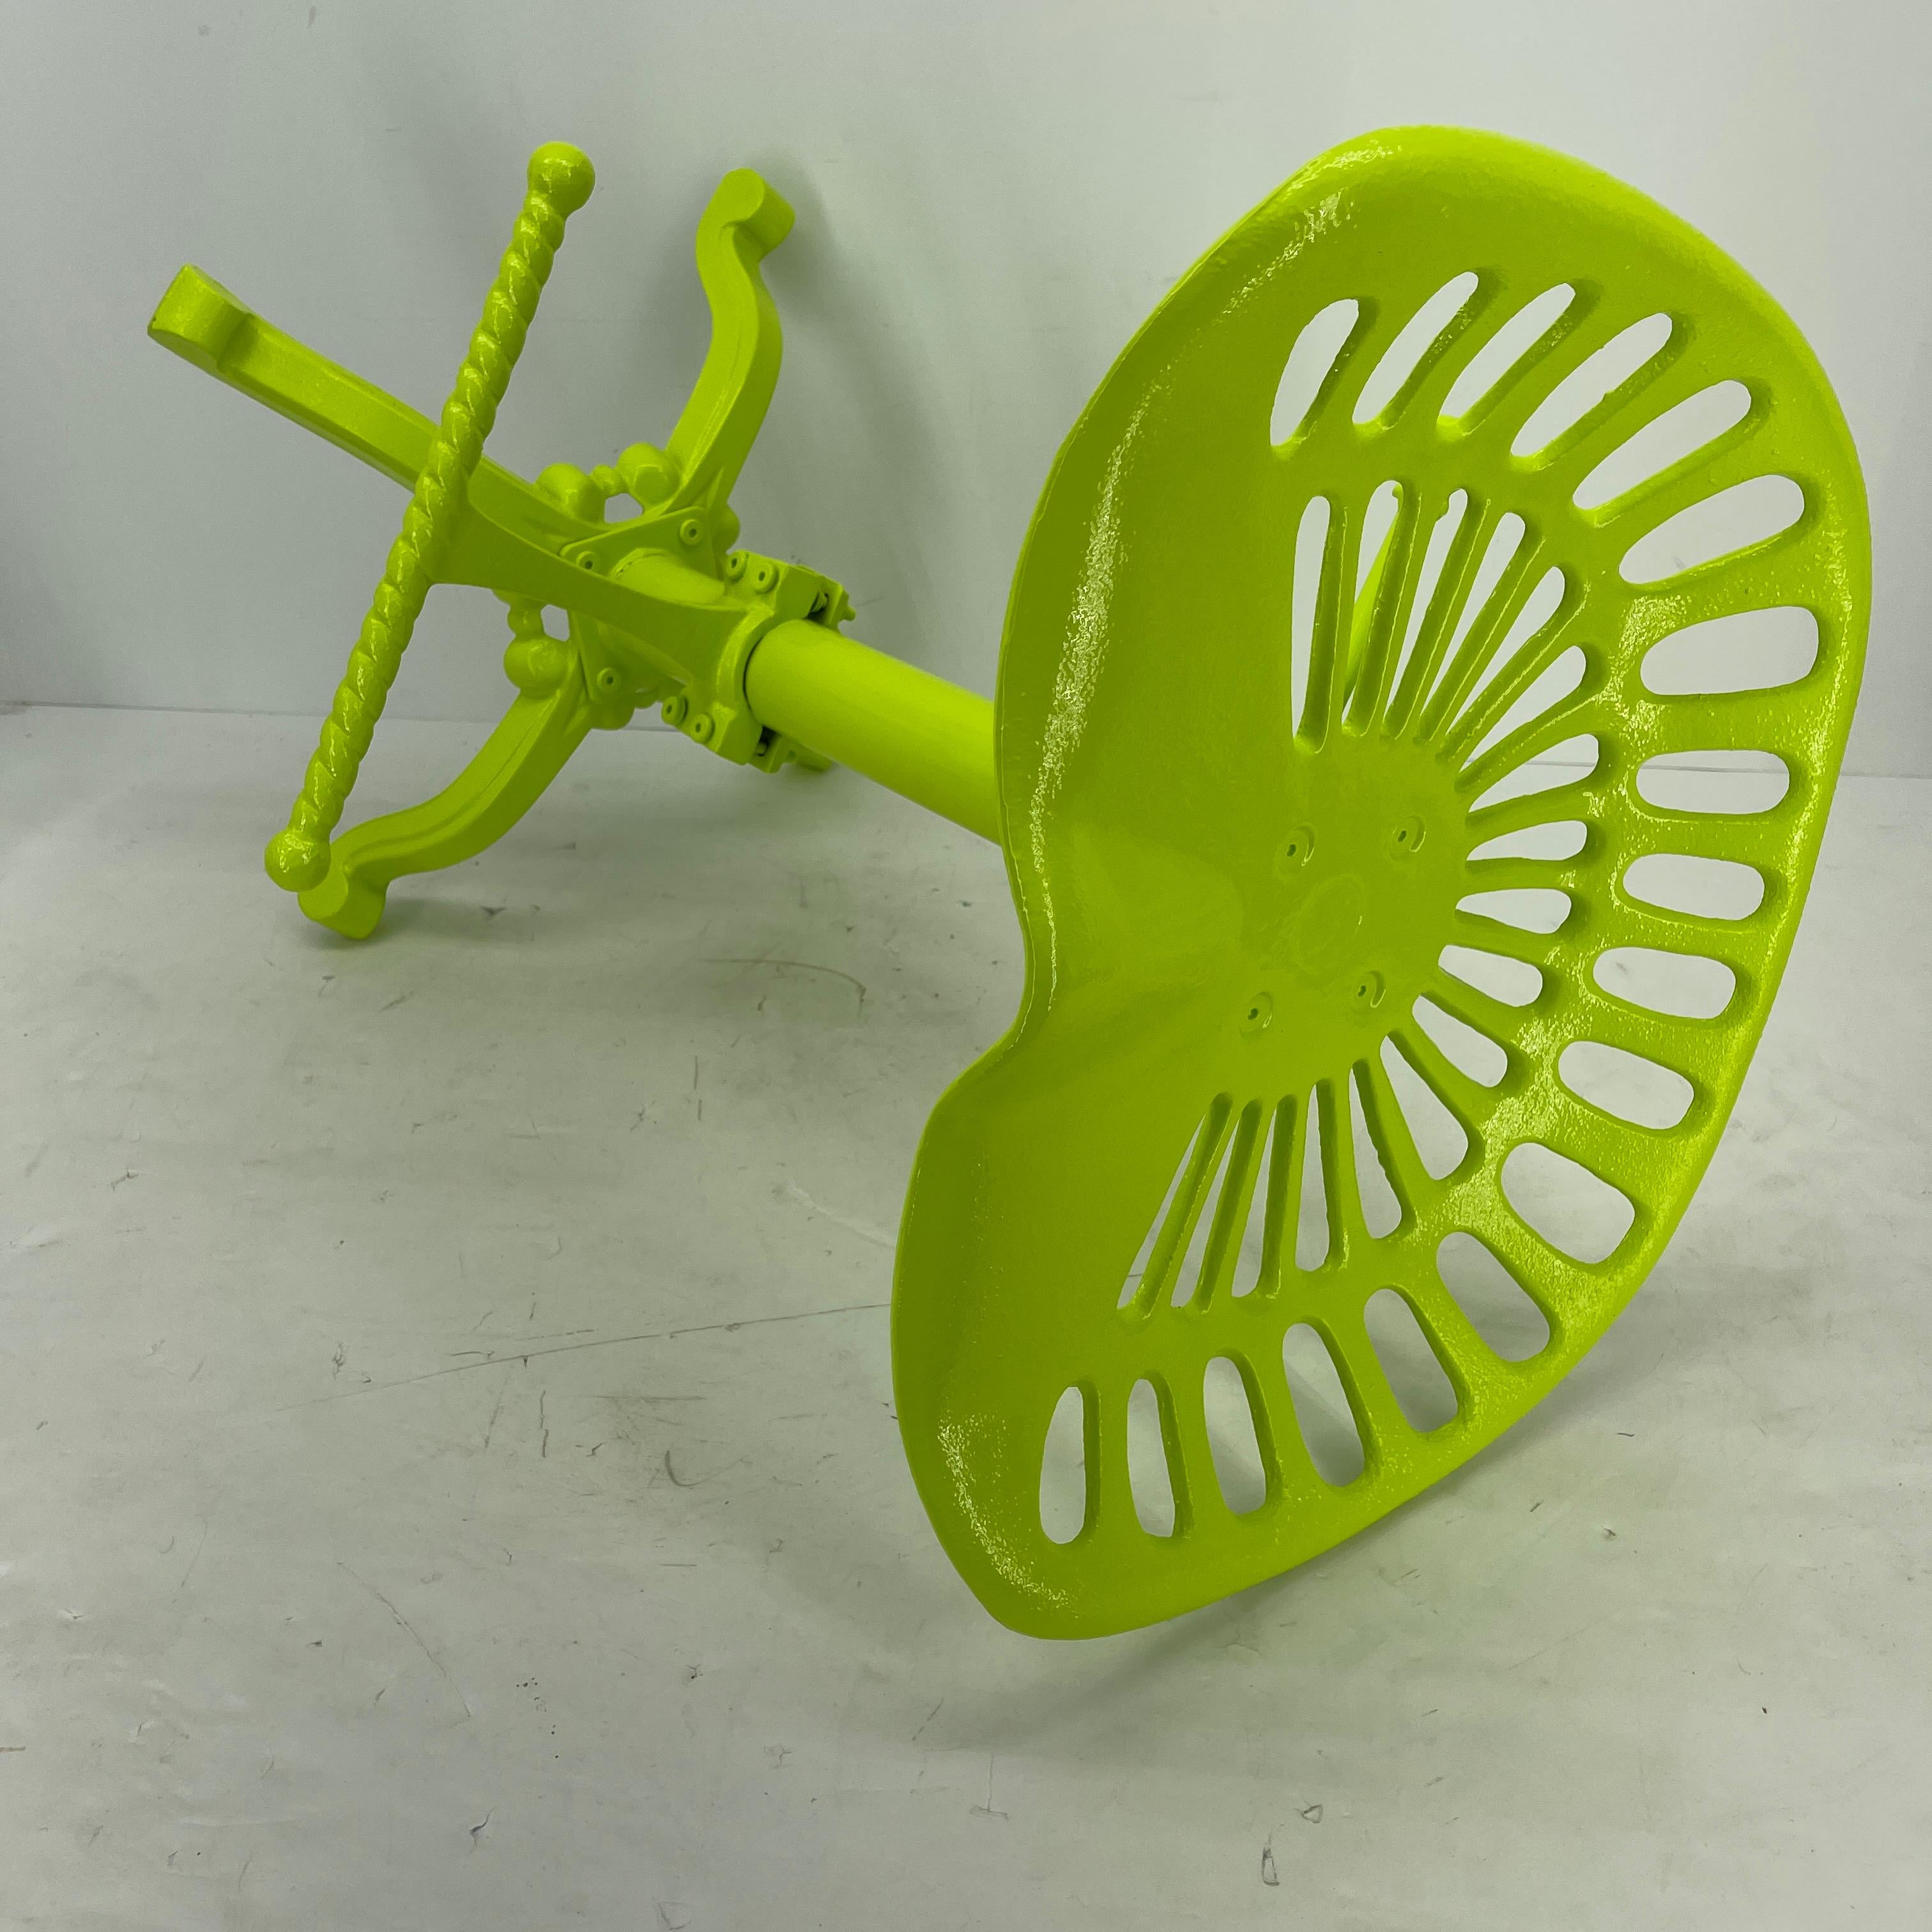 Vintage Industrial Metal Tractor Seat Stool, Powder Coated Chartreuse In Good Condition For Sale In Haddonfield, NJ